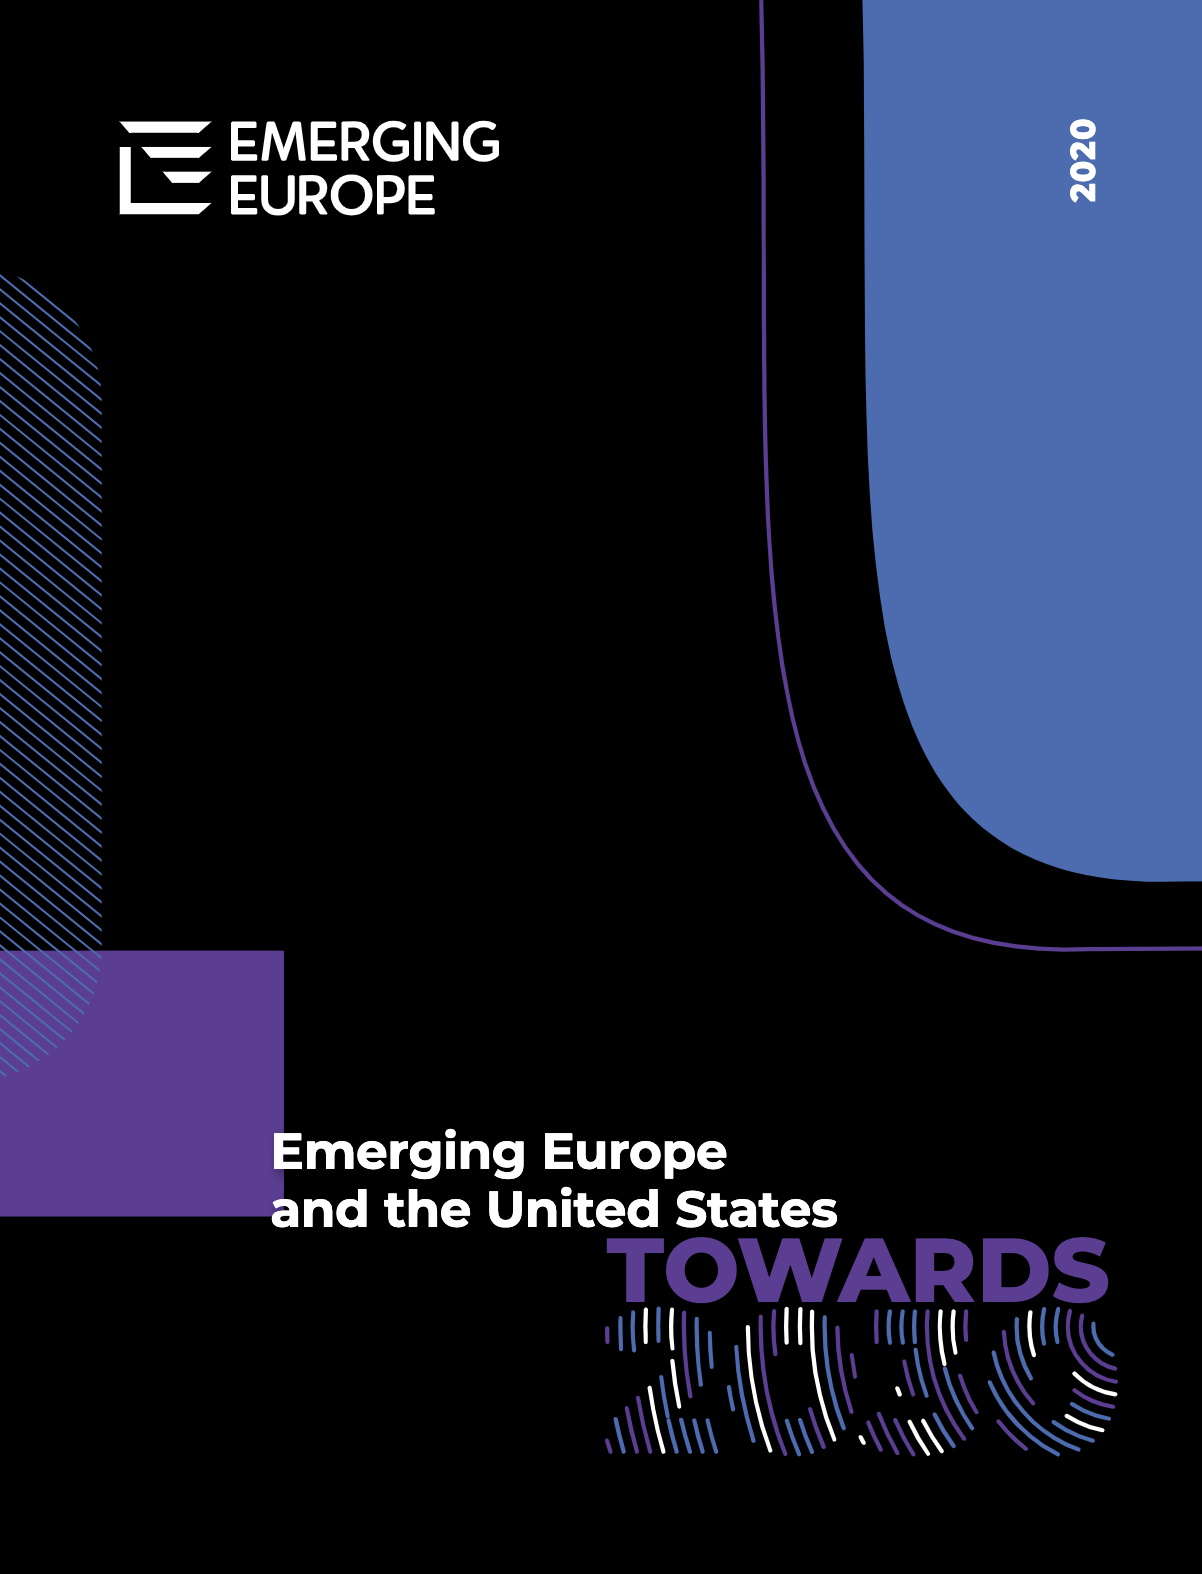 Emerging Europe and the United States: Towards 2030